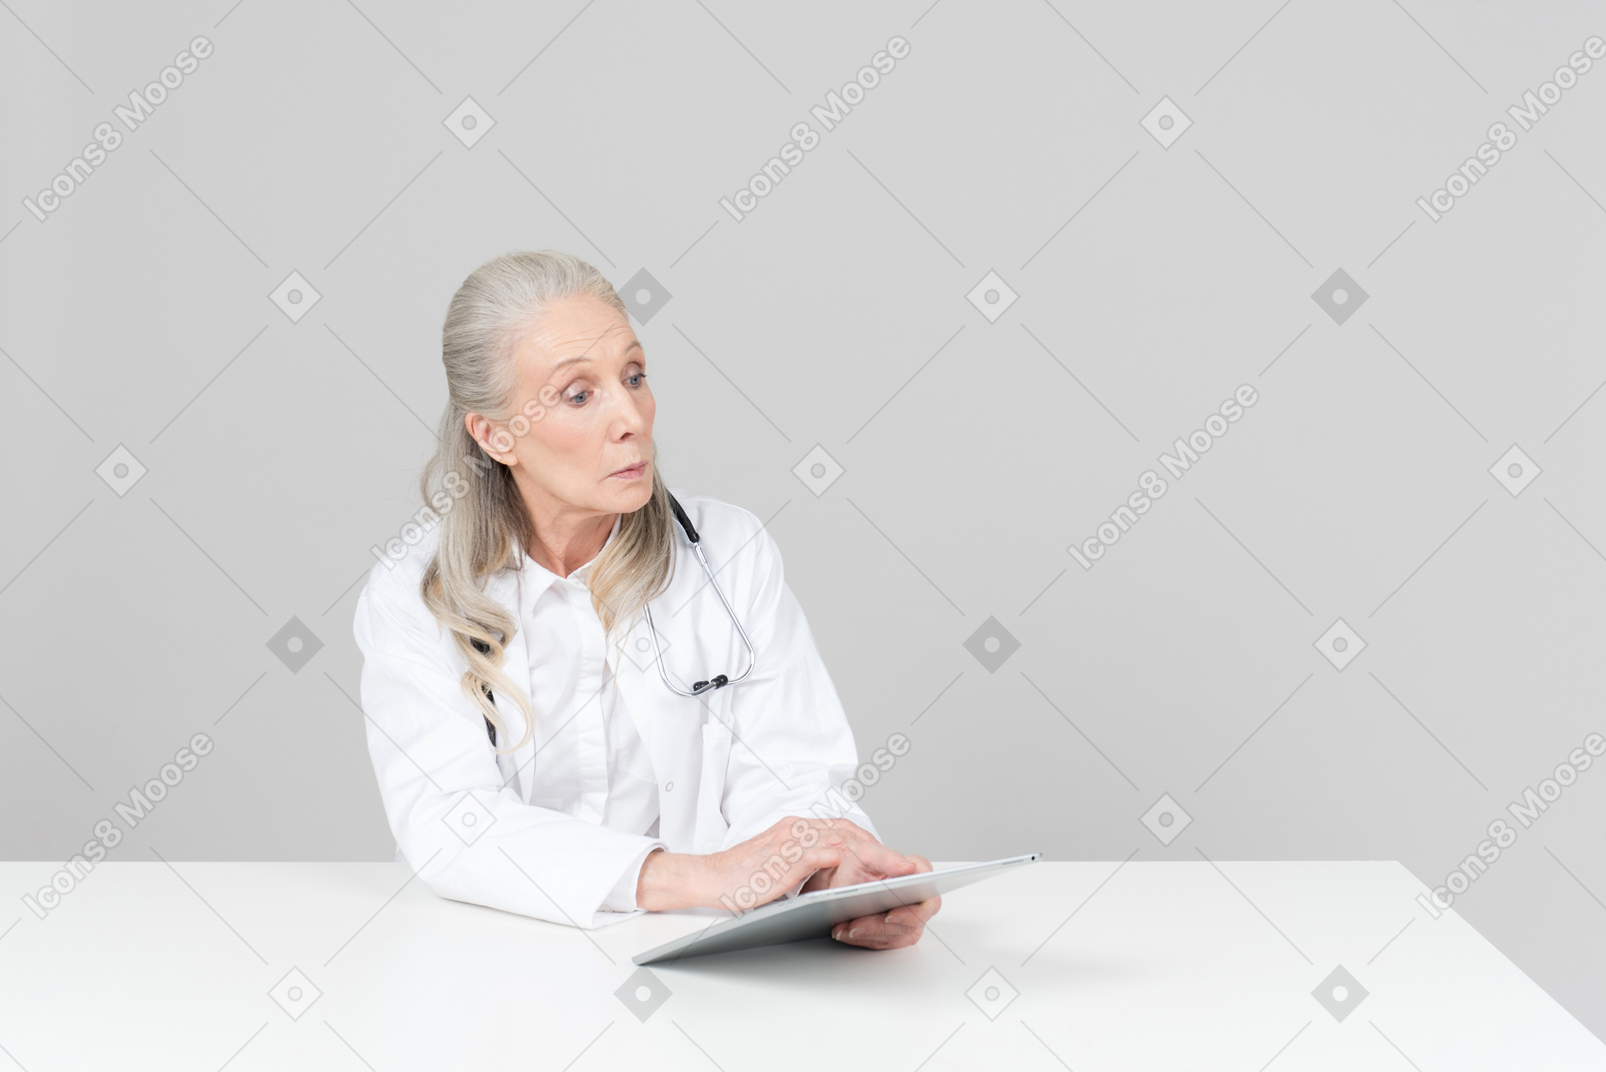 Aged female doctor working on a digital tablet